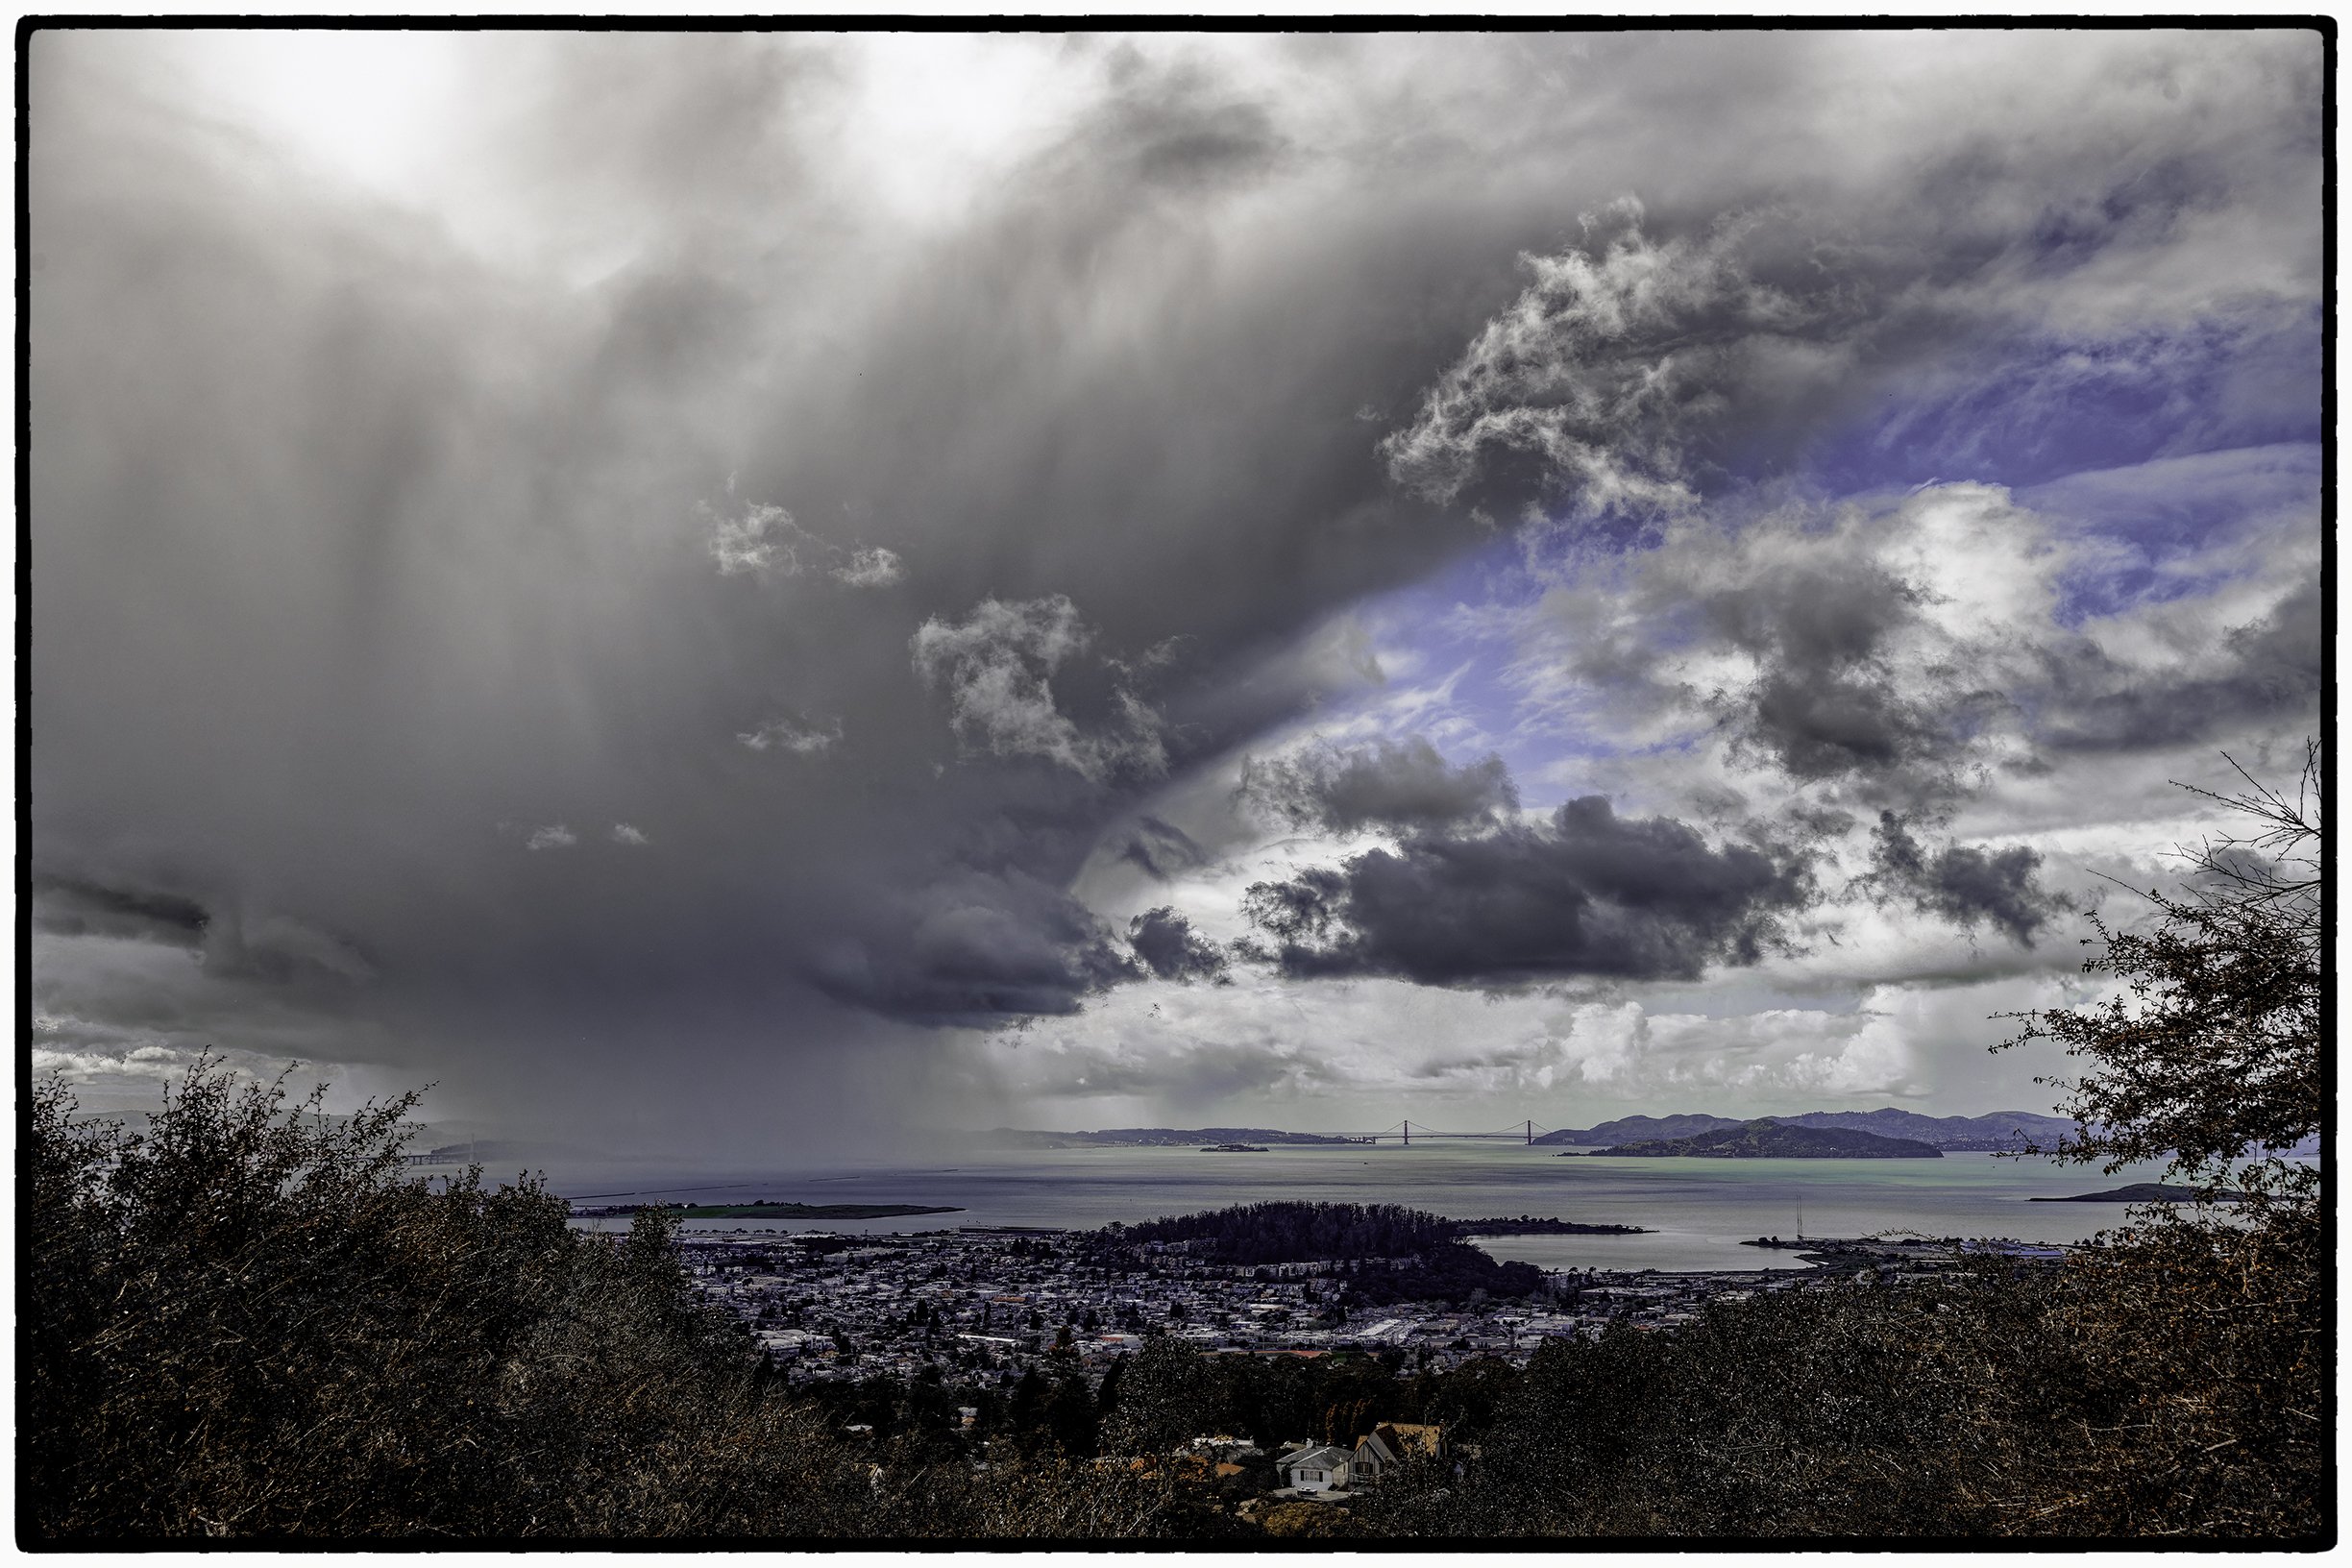 Approaching storm over SF Bay